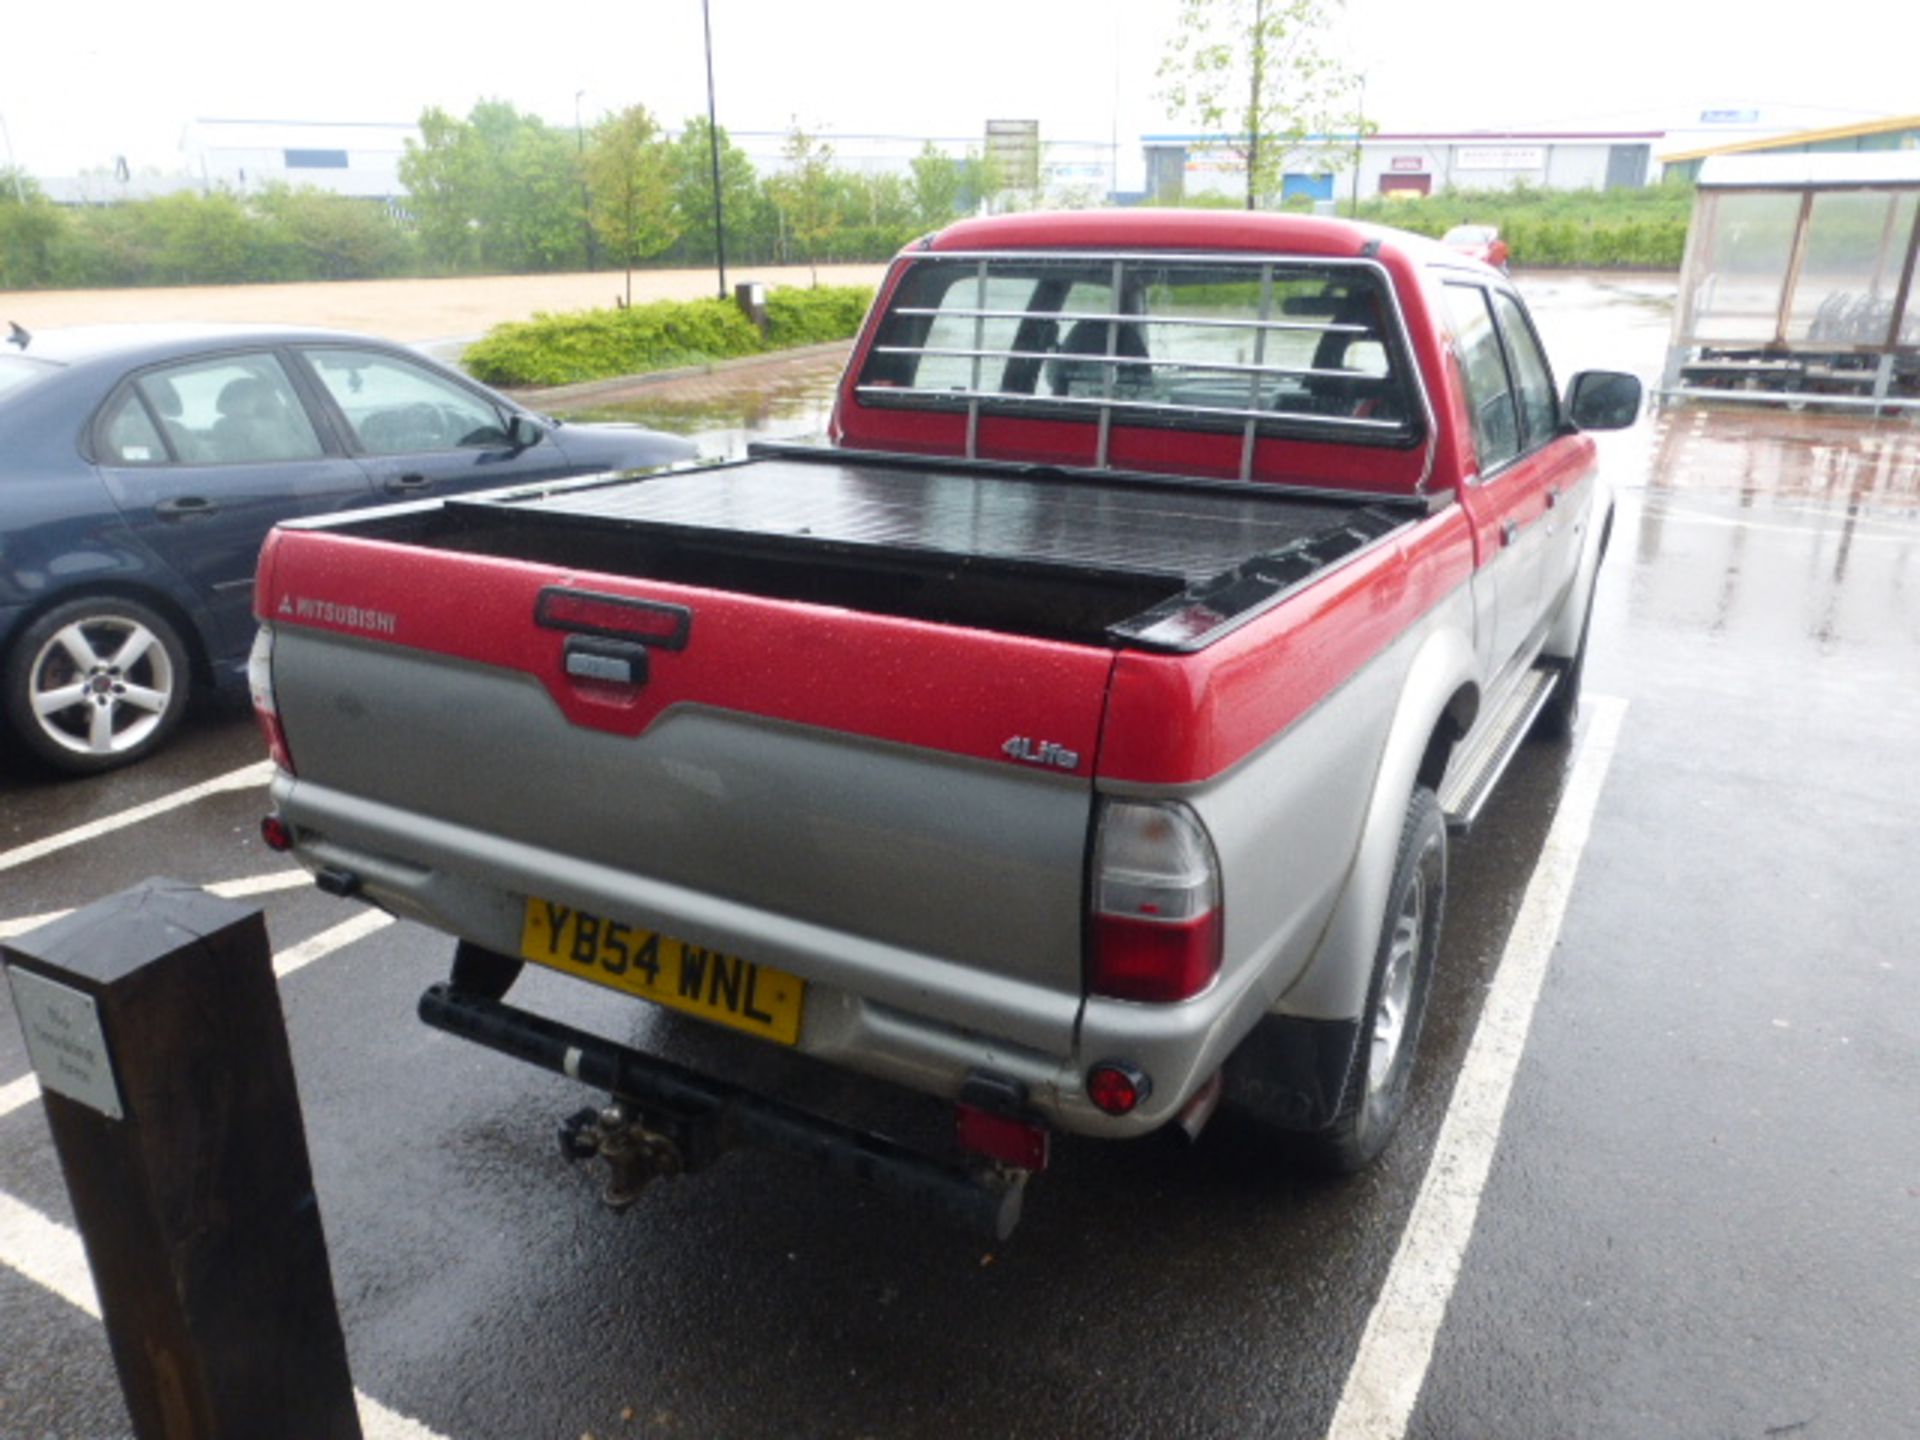 YB54 WNL (2005) Mitsubishi L200 2.5td 4-Life 4WD, 2477cc diesel in red/silver MOT: 14/5/21 - Image 3 of 8